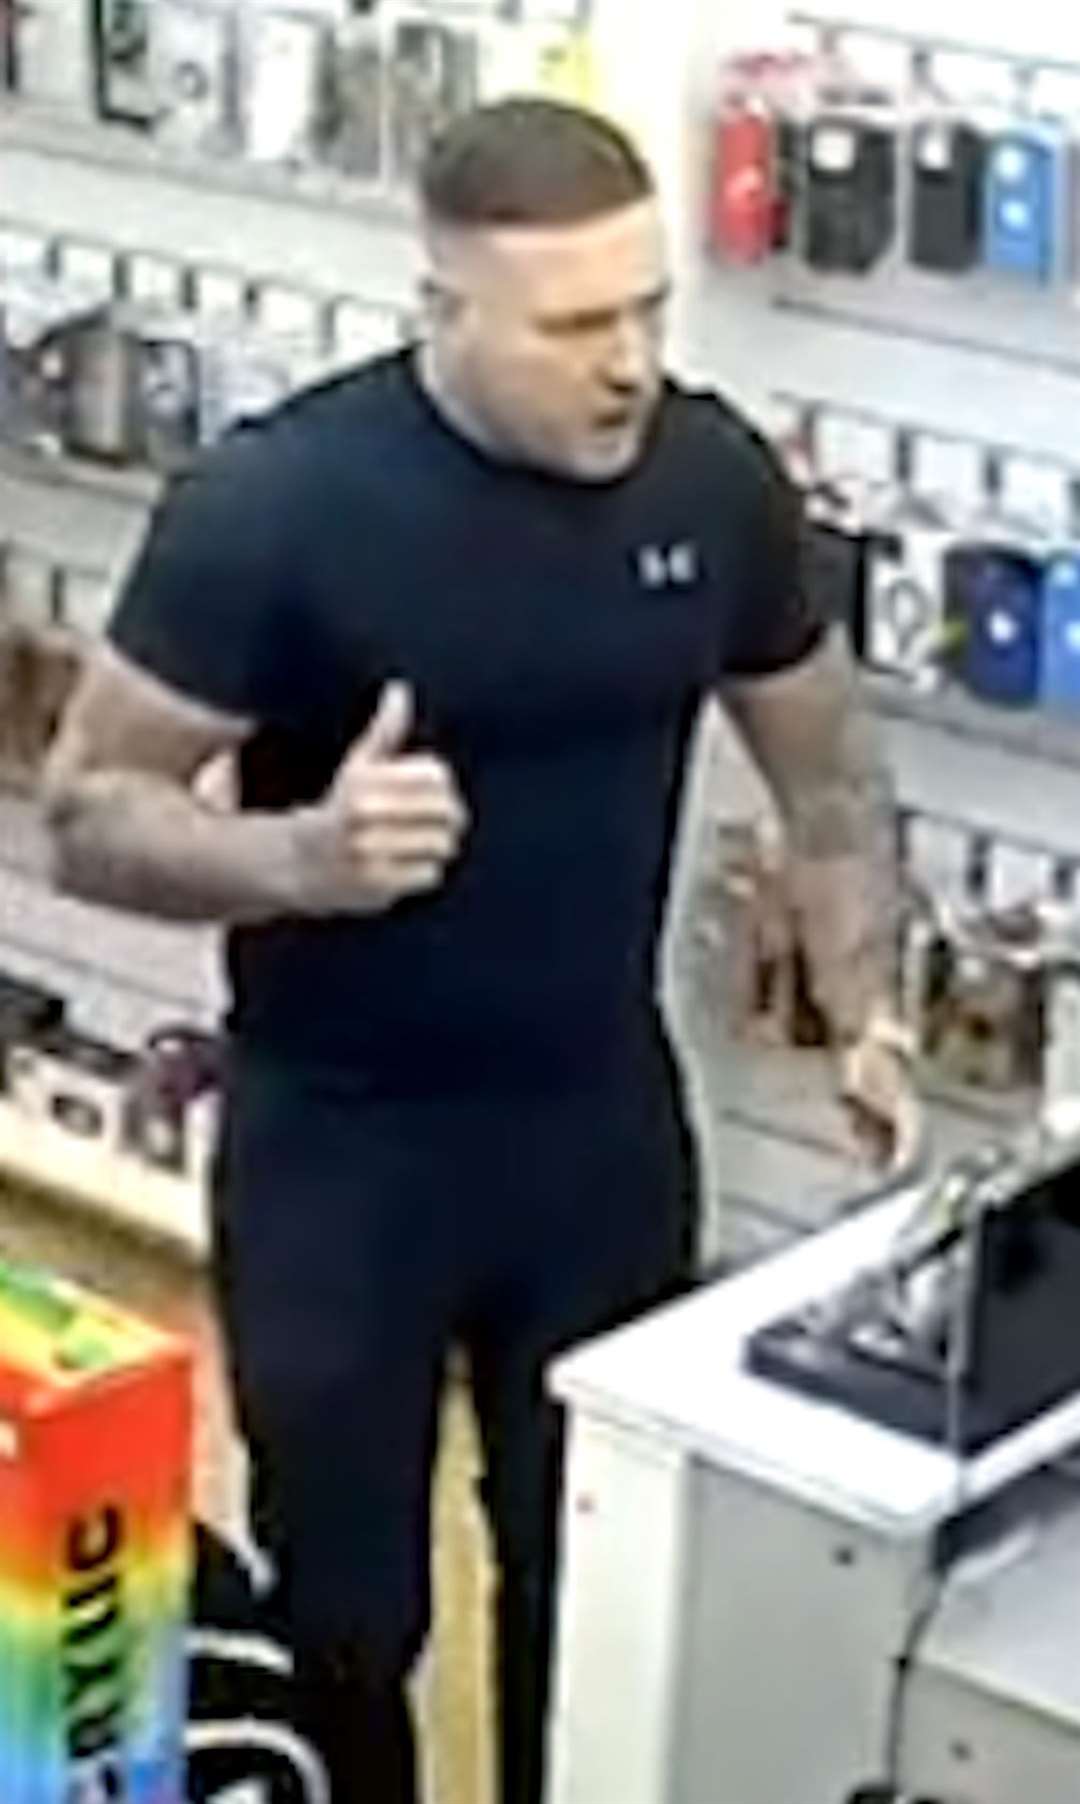 Police have released a CCTV image of a man who may be able to assist inquiries into an assault in a shop in Canterbury High Street. Picture: Kent Police